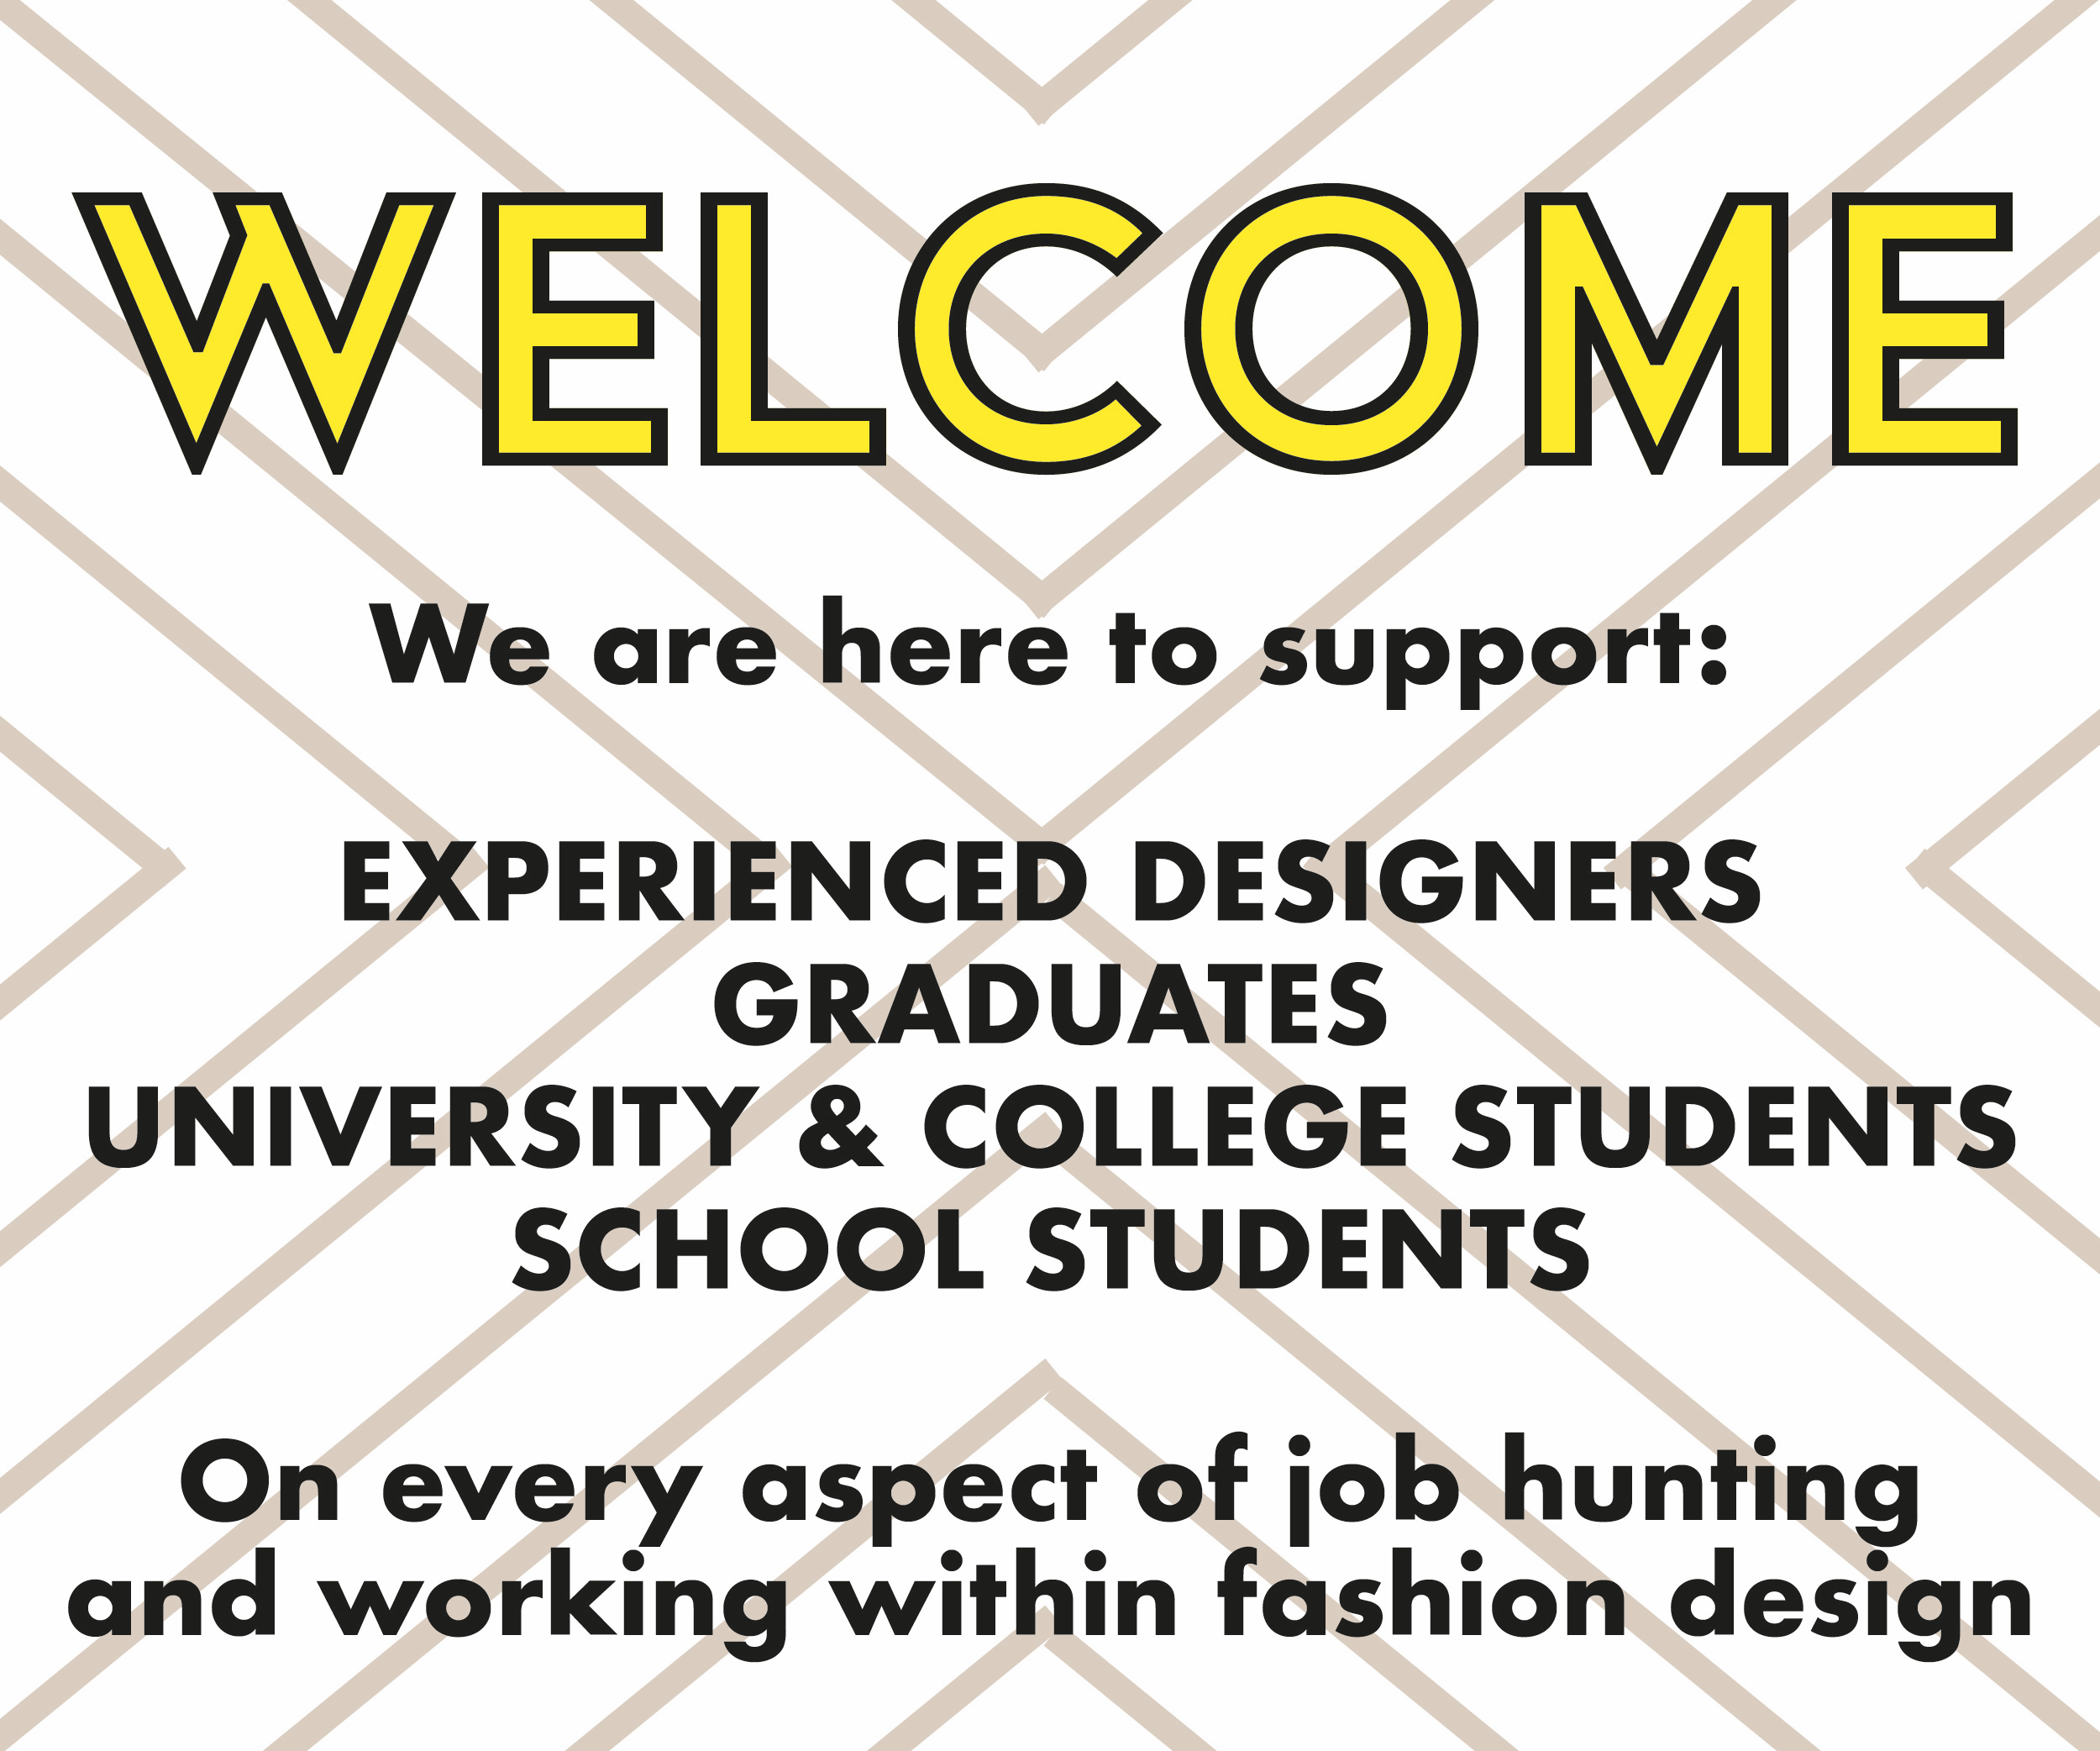 Support EXPERIENCED DESIGNERS, FASHION GRADUATES, UNIVERSITY & COLLEGE STUDENTS, SCHOOL STUDENTS. Careers Job Hunting Fashion